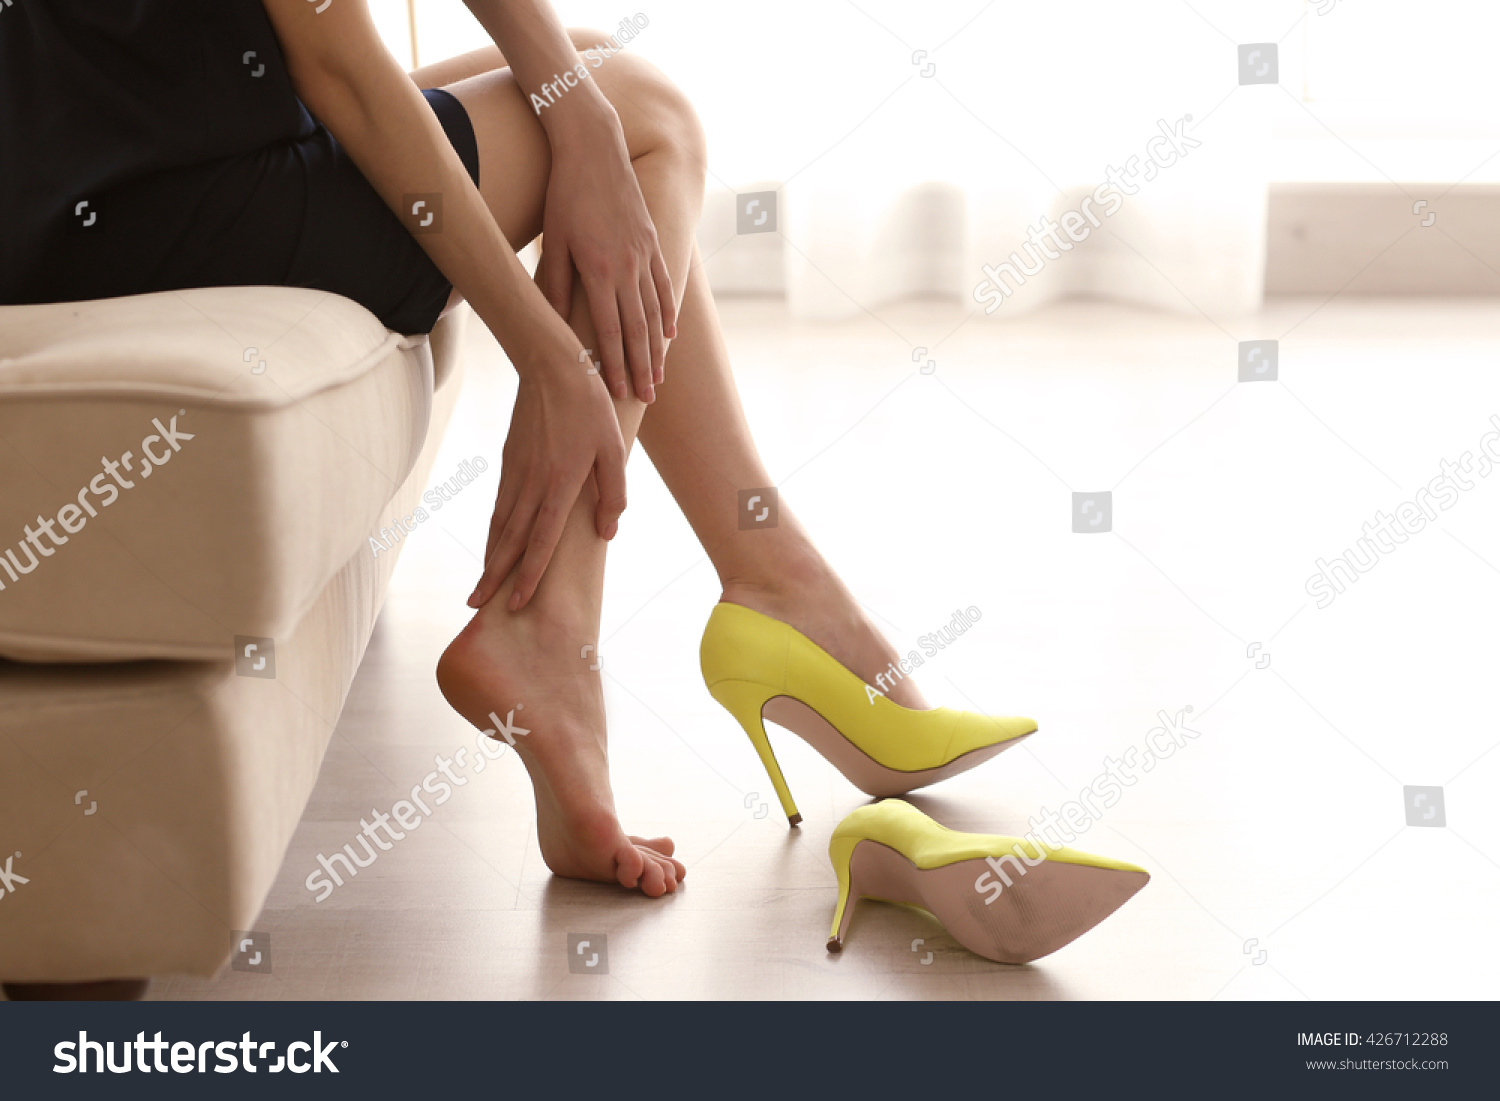 Woman in yellow high heels shoes. #426712288